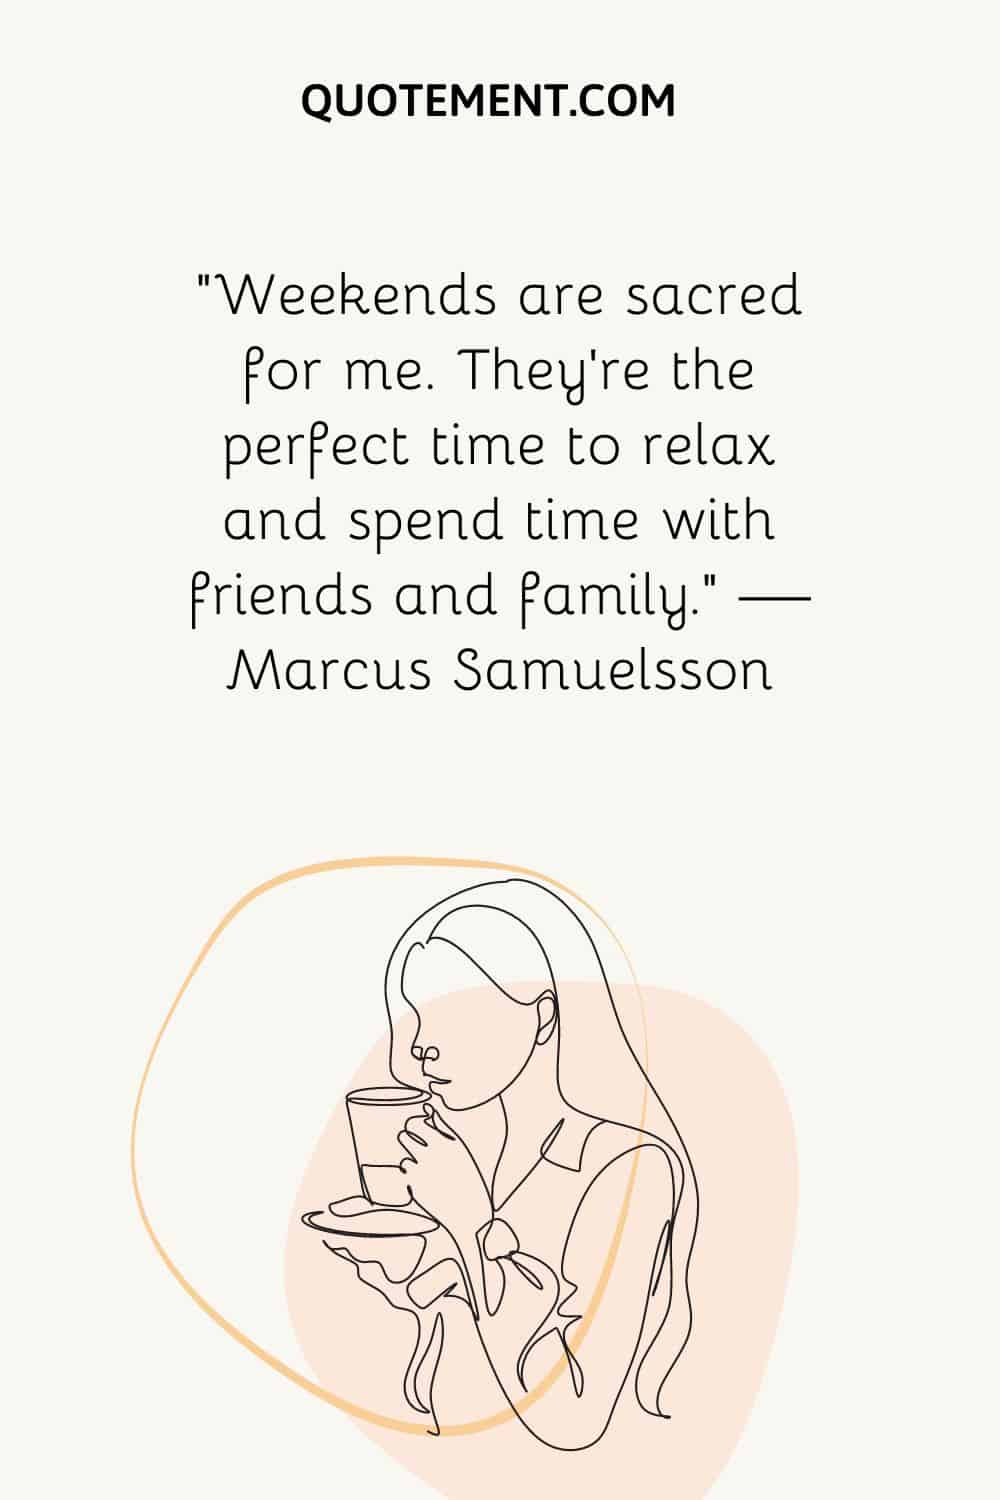 girl drinking from cup illustration representing weekend quote